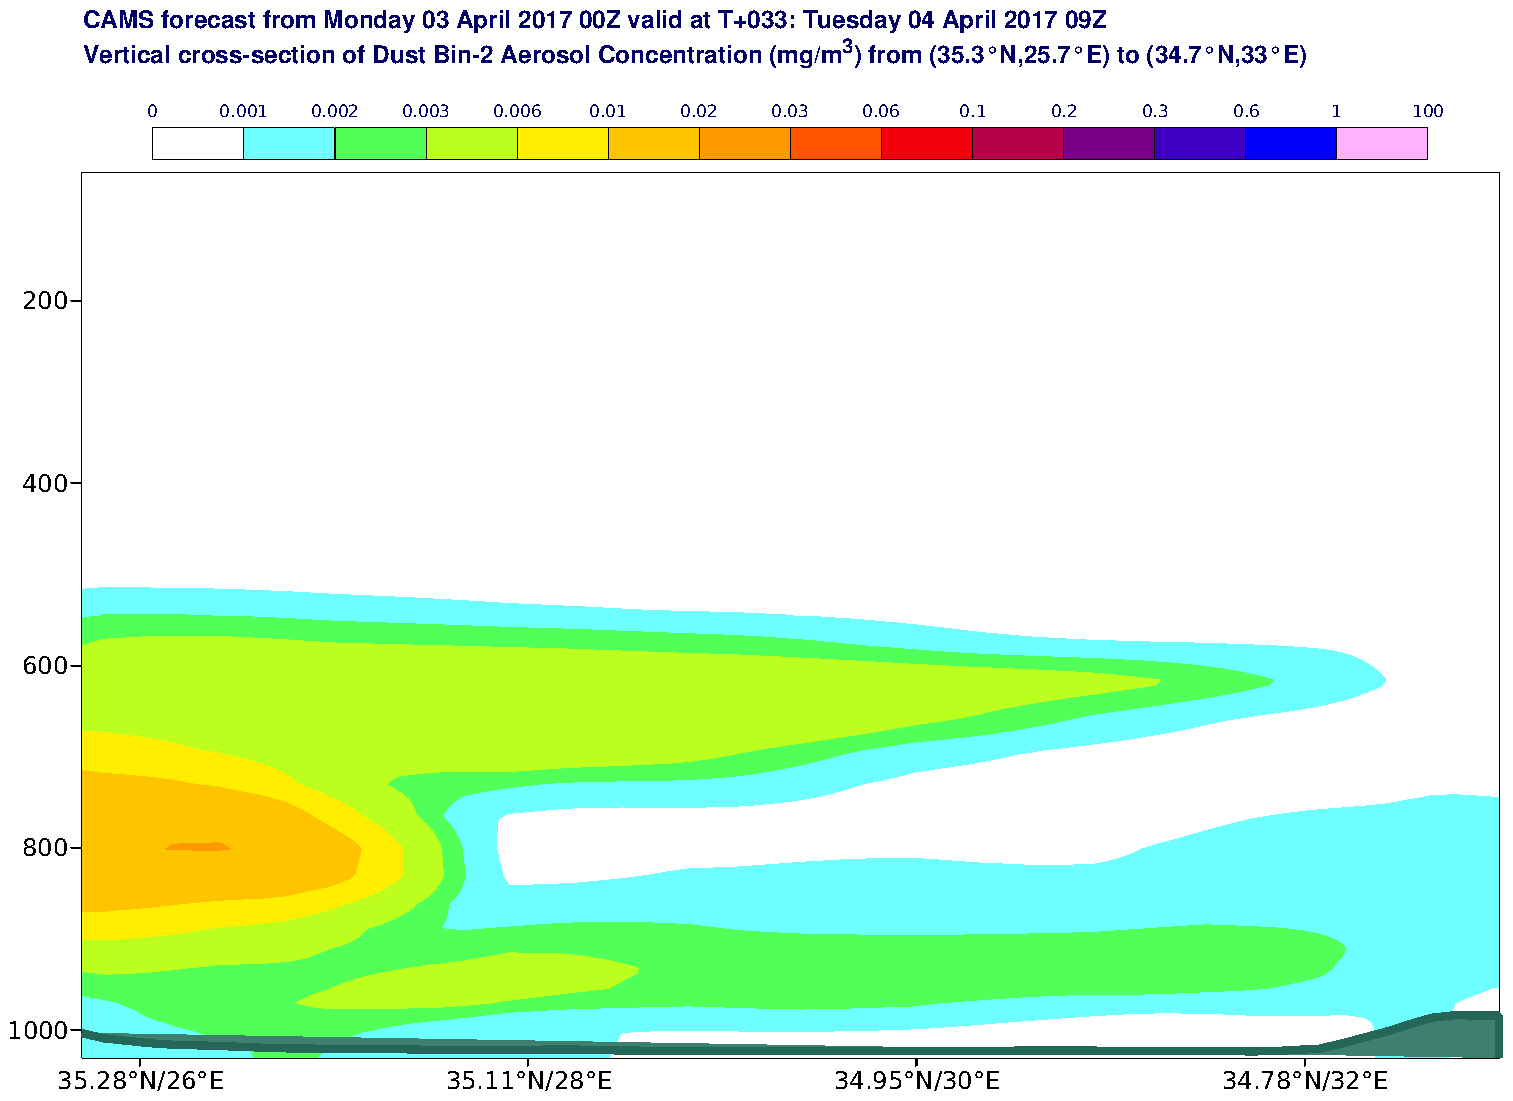 Vertical cross-section of Dust Bin-2 Aerosol Concentration (mg/m3) valid at T33 - 2017-04-04 09:00